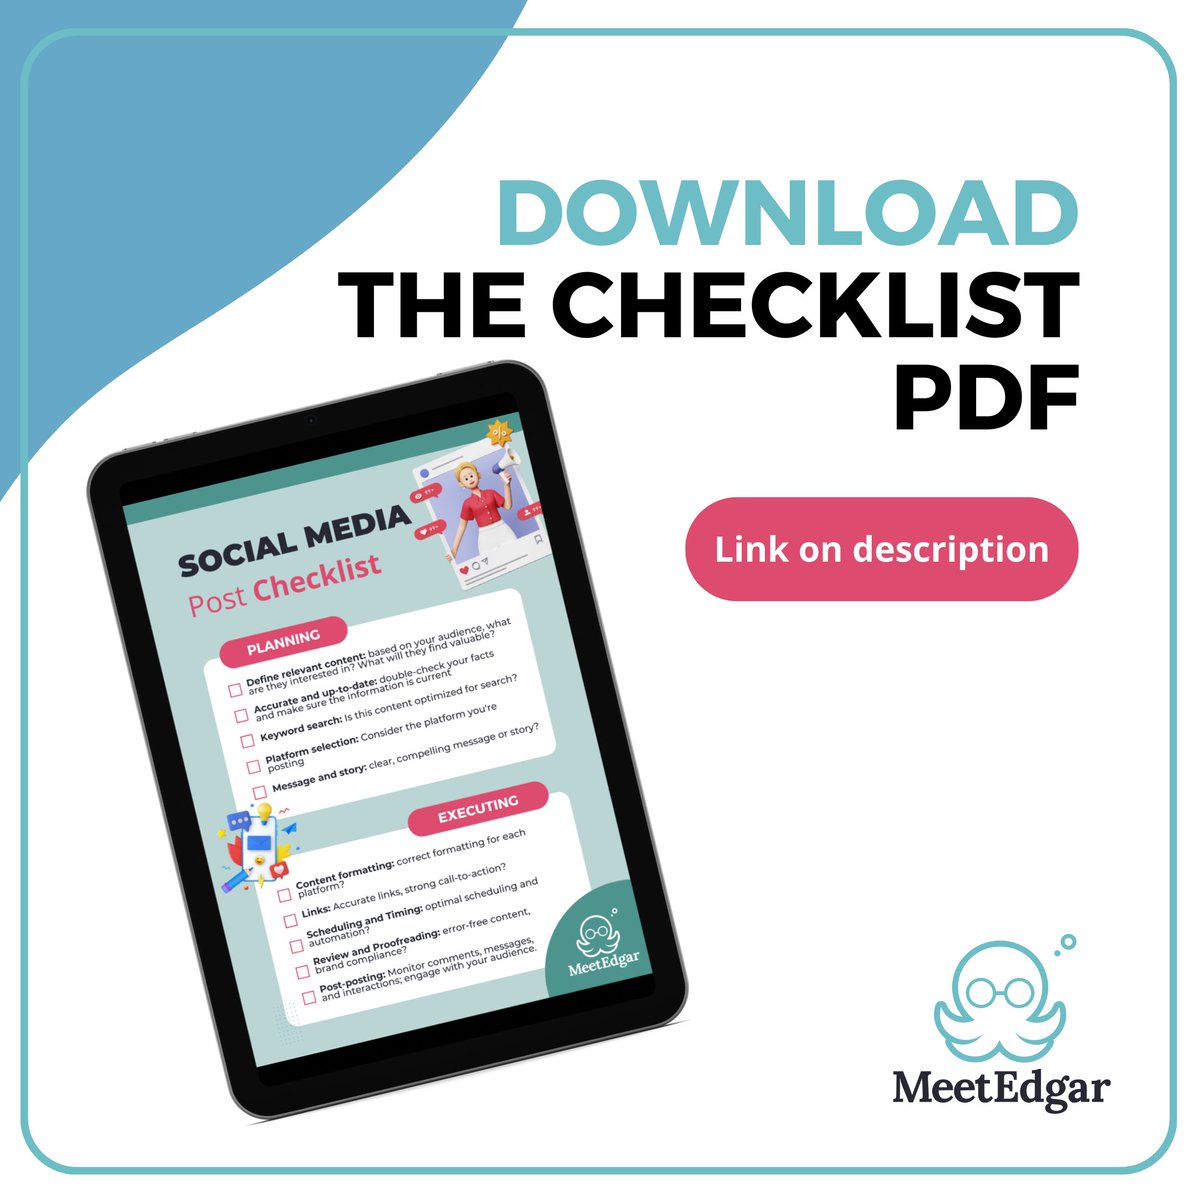 Posting on social media might feel like navigating uncharted waters, but I've got your back. Here's a handy checklist to make sure you're all set before you hit that 'post' button. Download it here: bit.ly/Edgarchecklist #SocialMediaTips #SocialMediaMarketing #ContentStrategy